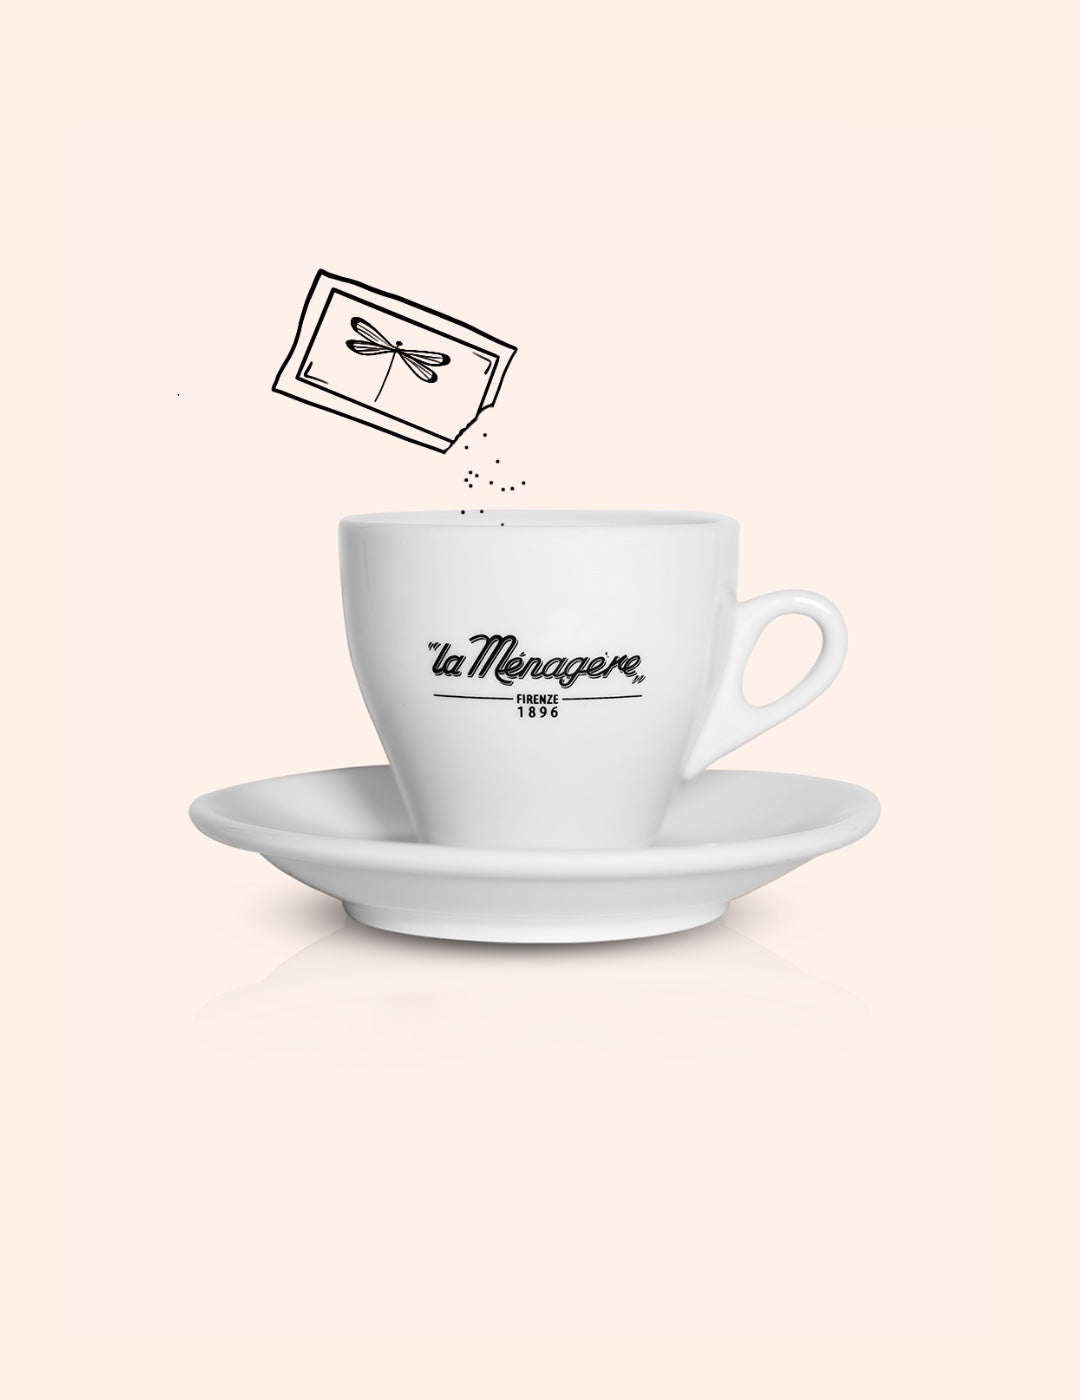 The Iconic double espresso cup